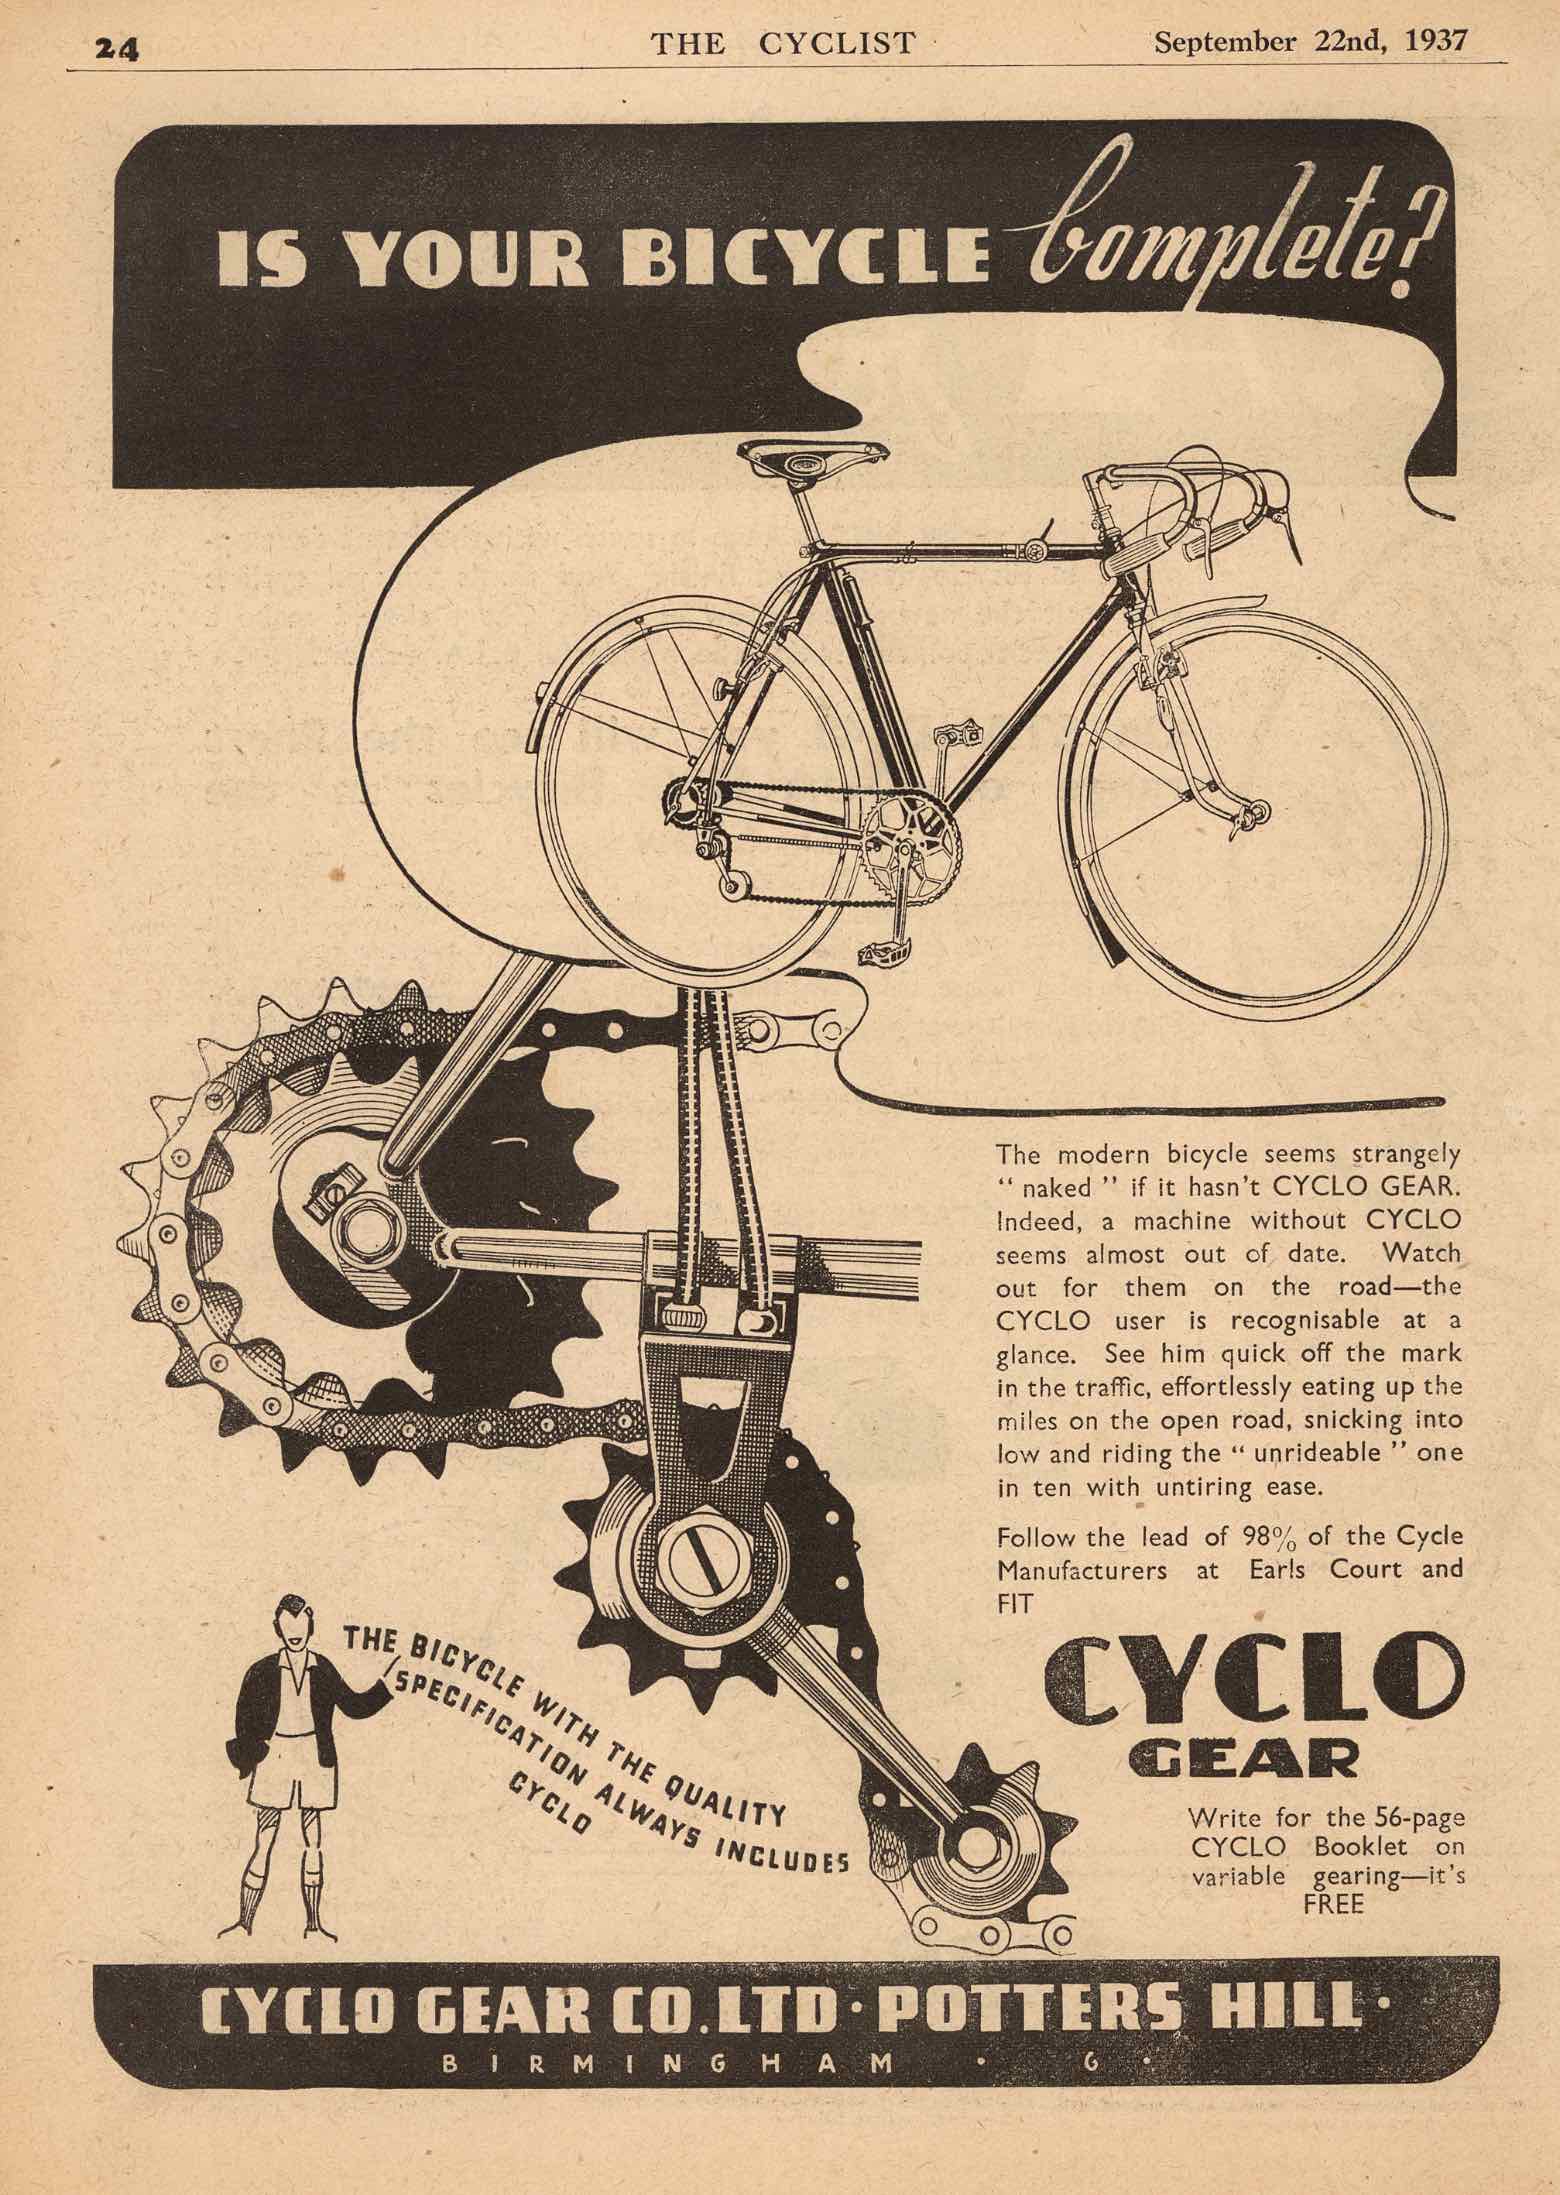 The Cyclist September 1937 - Cyclo advert main image